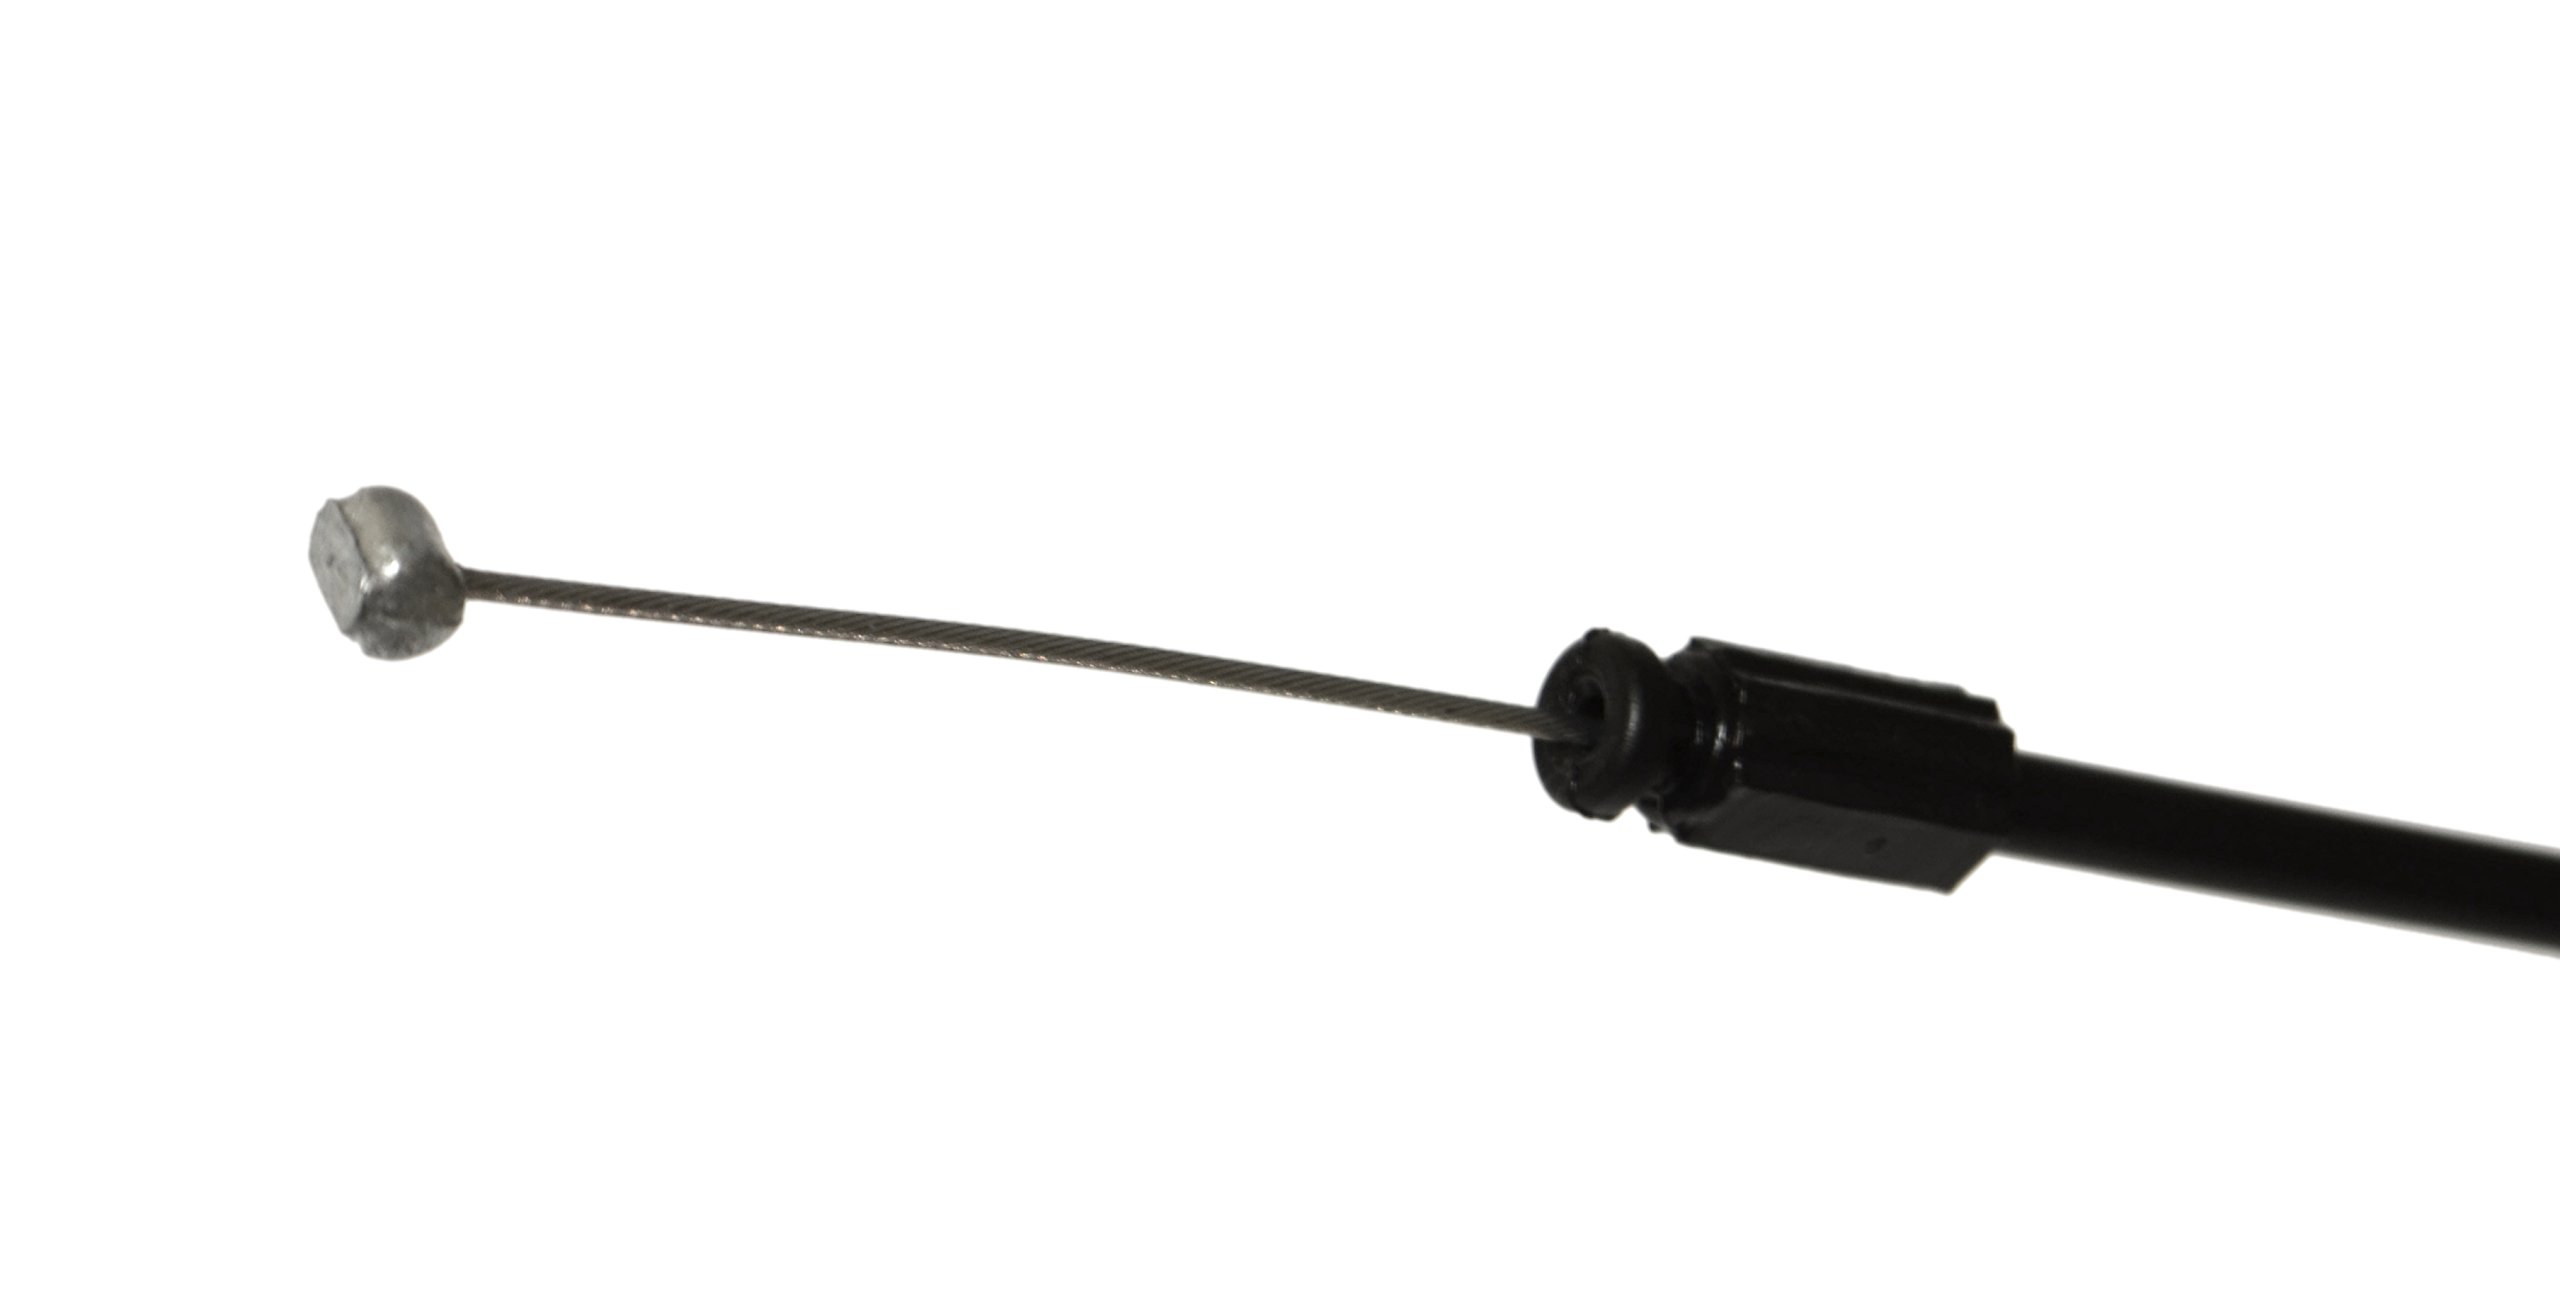 Recliner-Handles Replacement Cable 2 1/8" Exposed Wire, 3mm Barrel-Tip, 6mm Barrel, 38" Overall Length